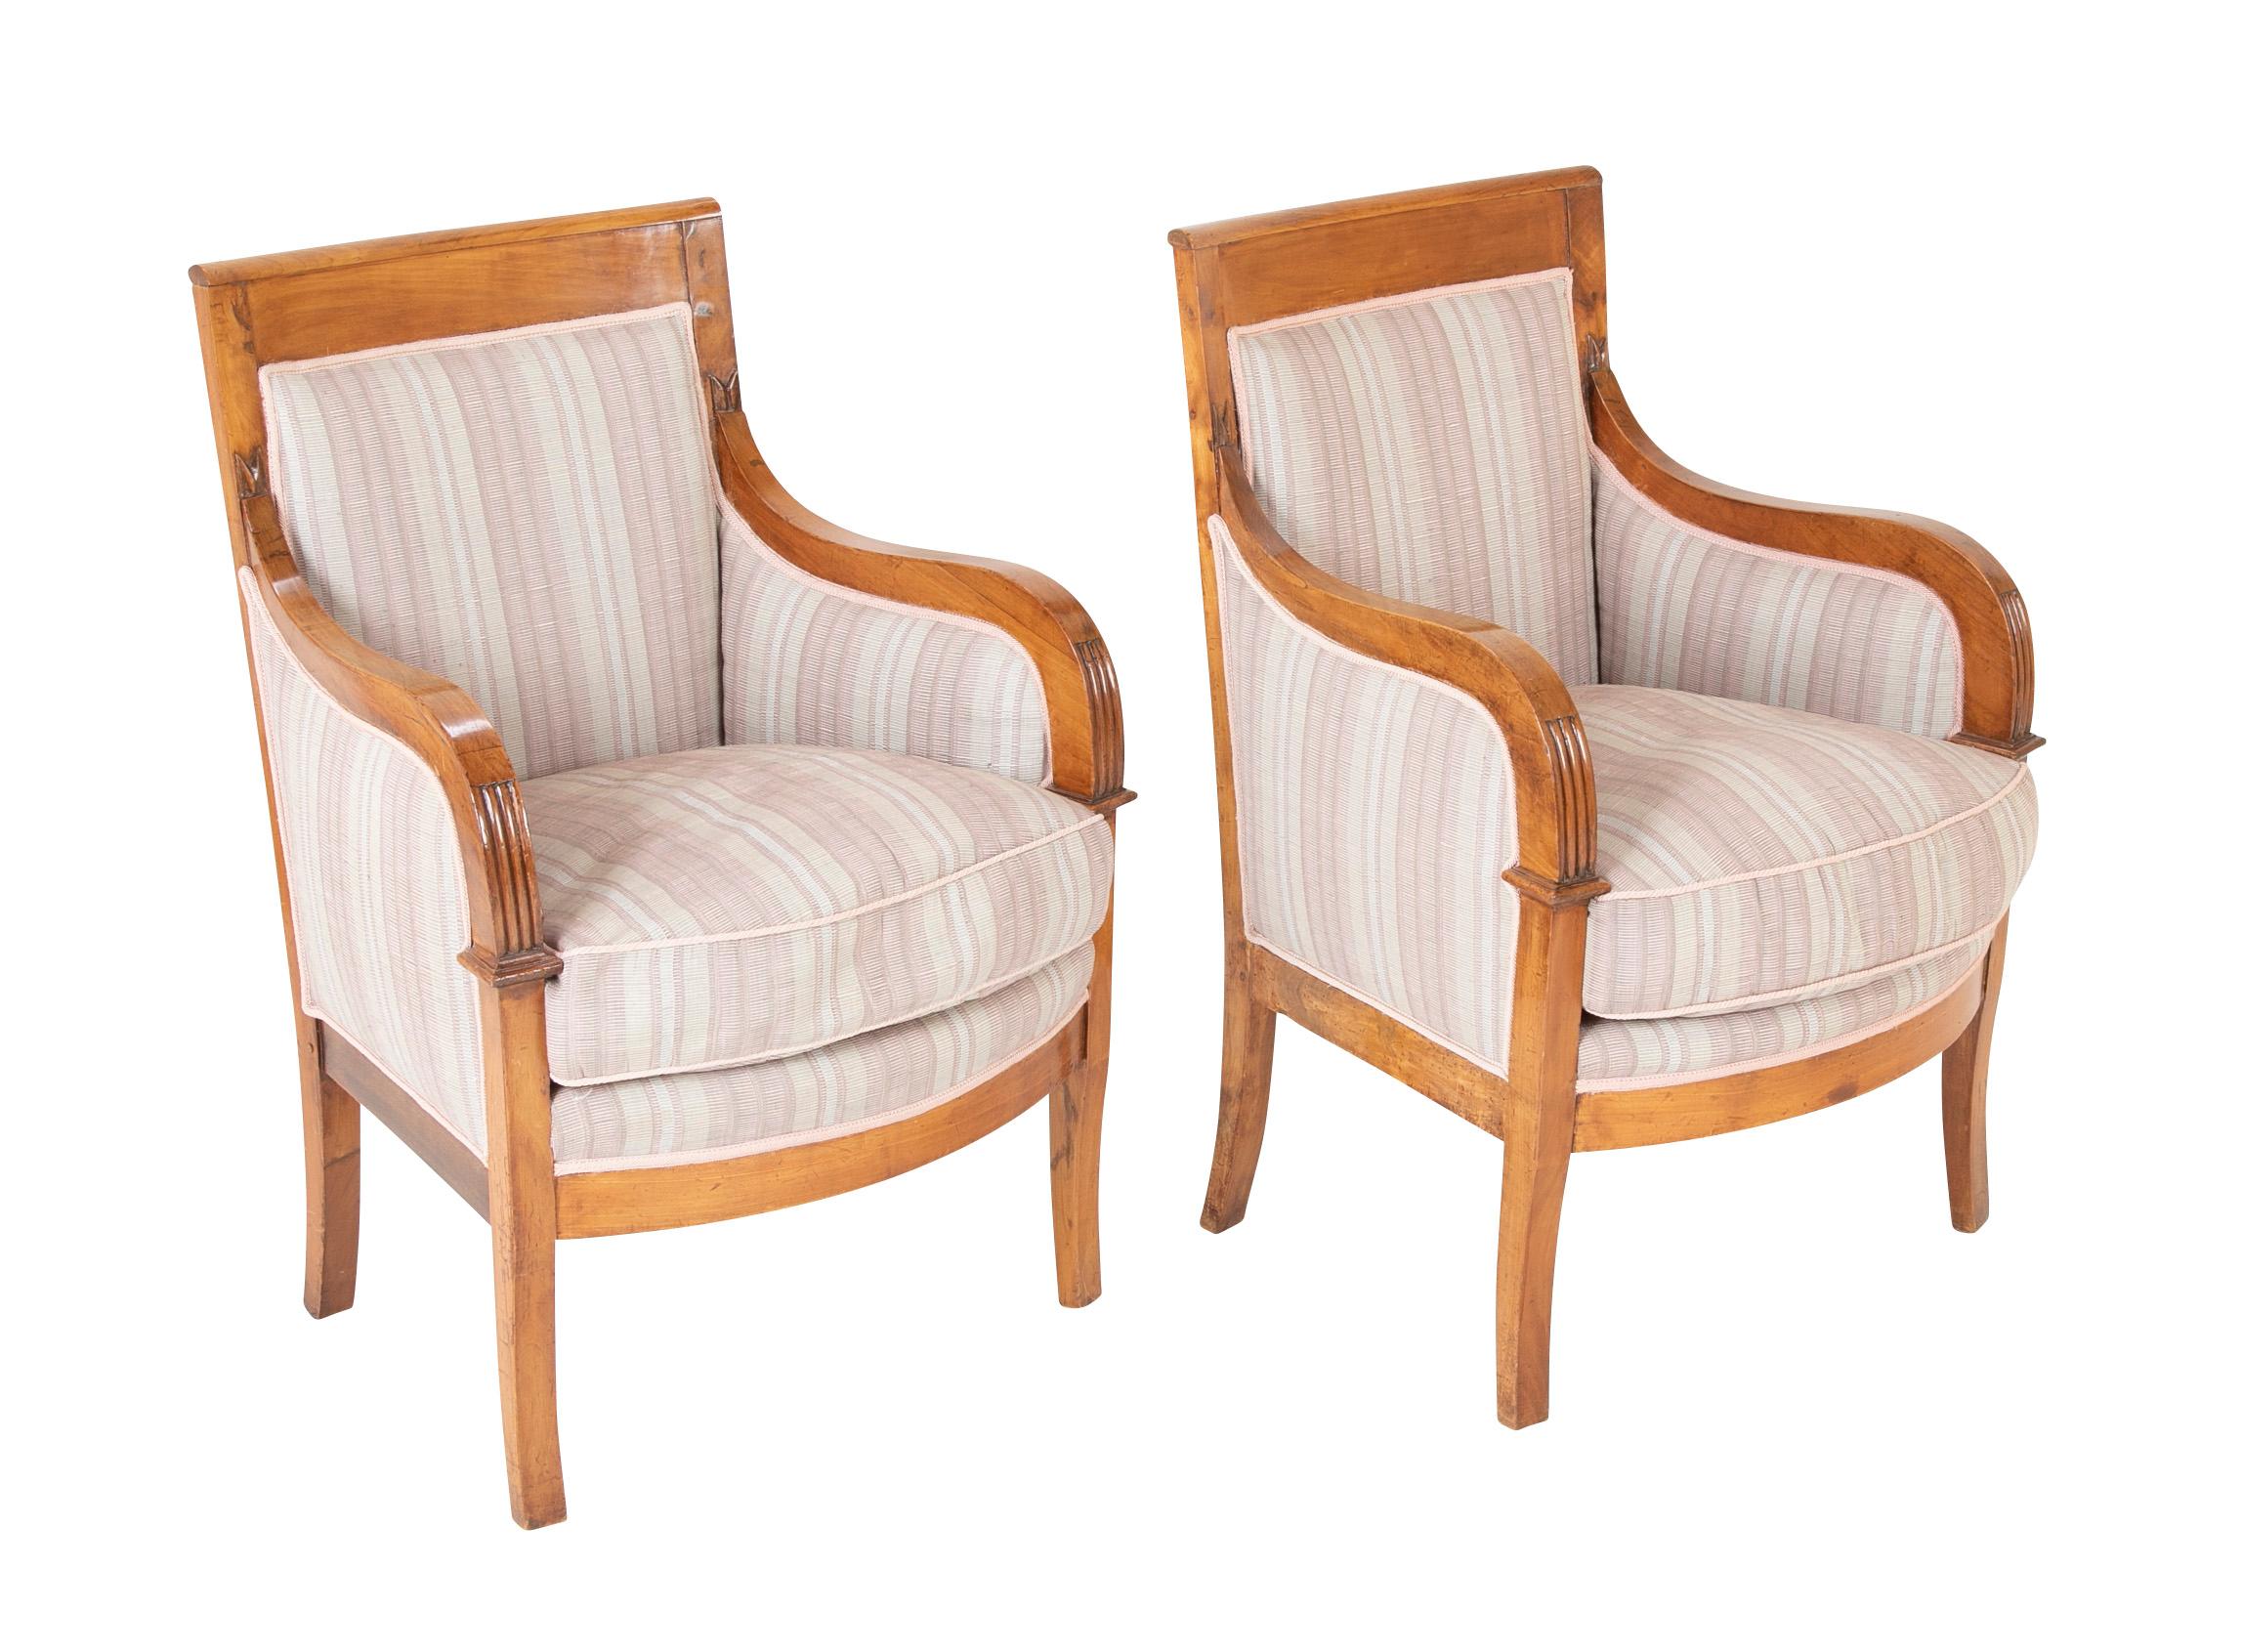 A pair of Biedermeier armchairs from the estate of Milton & Beatrice Stern, Greenwich, CT.

Featured on the October 1991 cover of Architectural Digest.

Seat height : 18